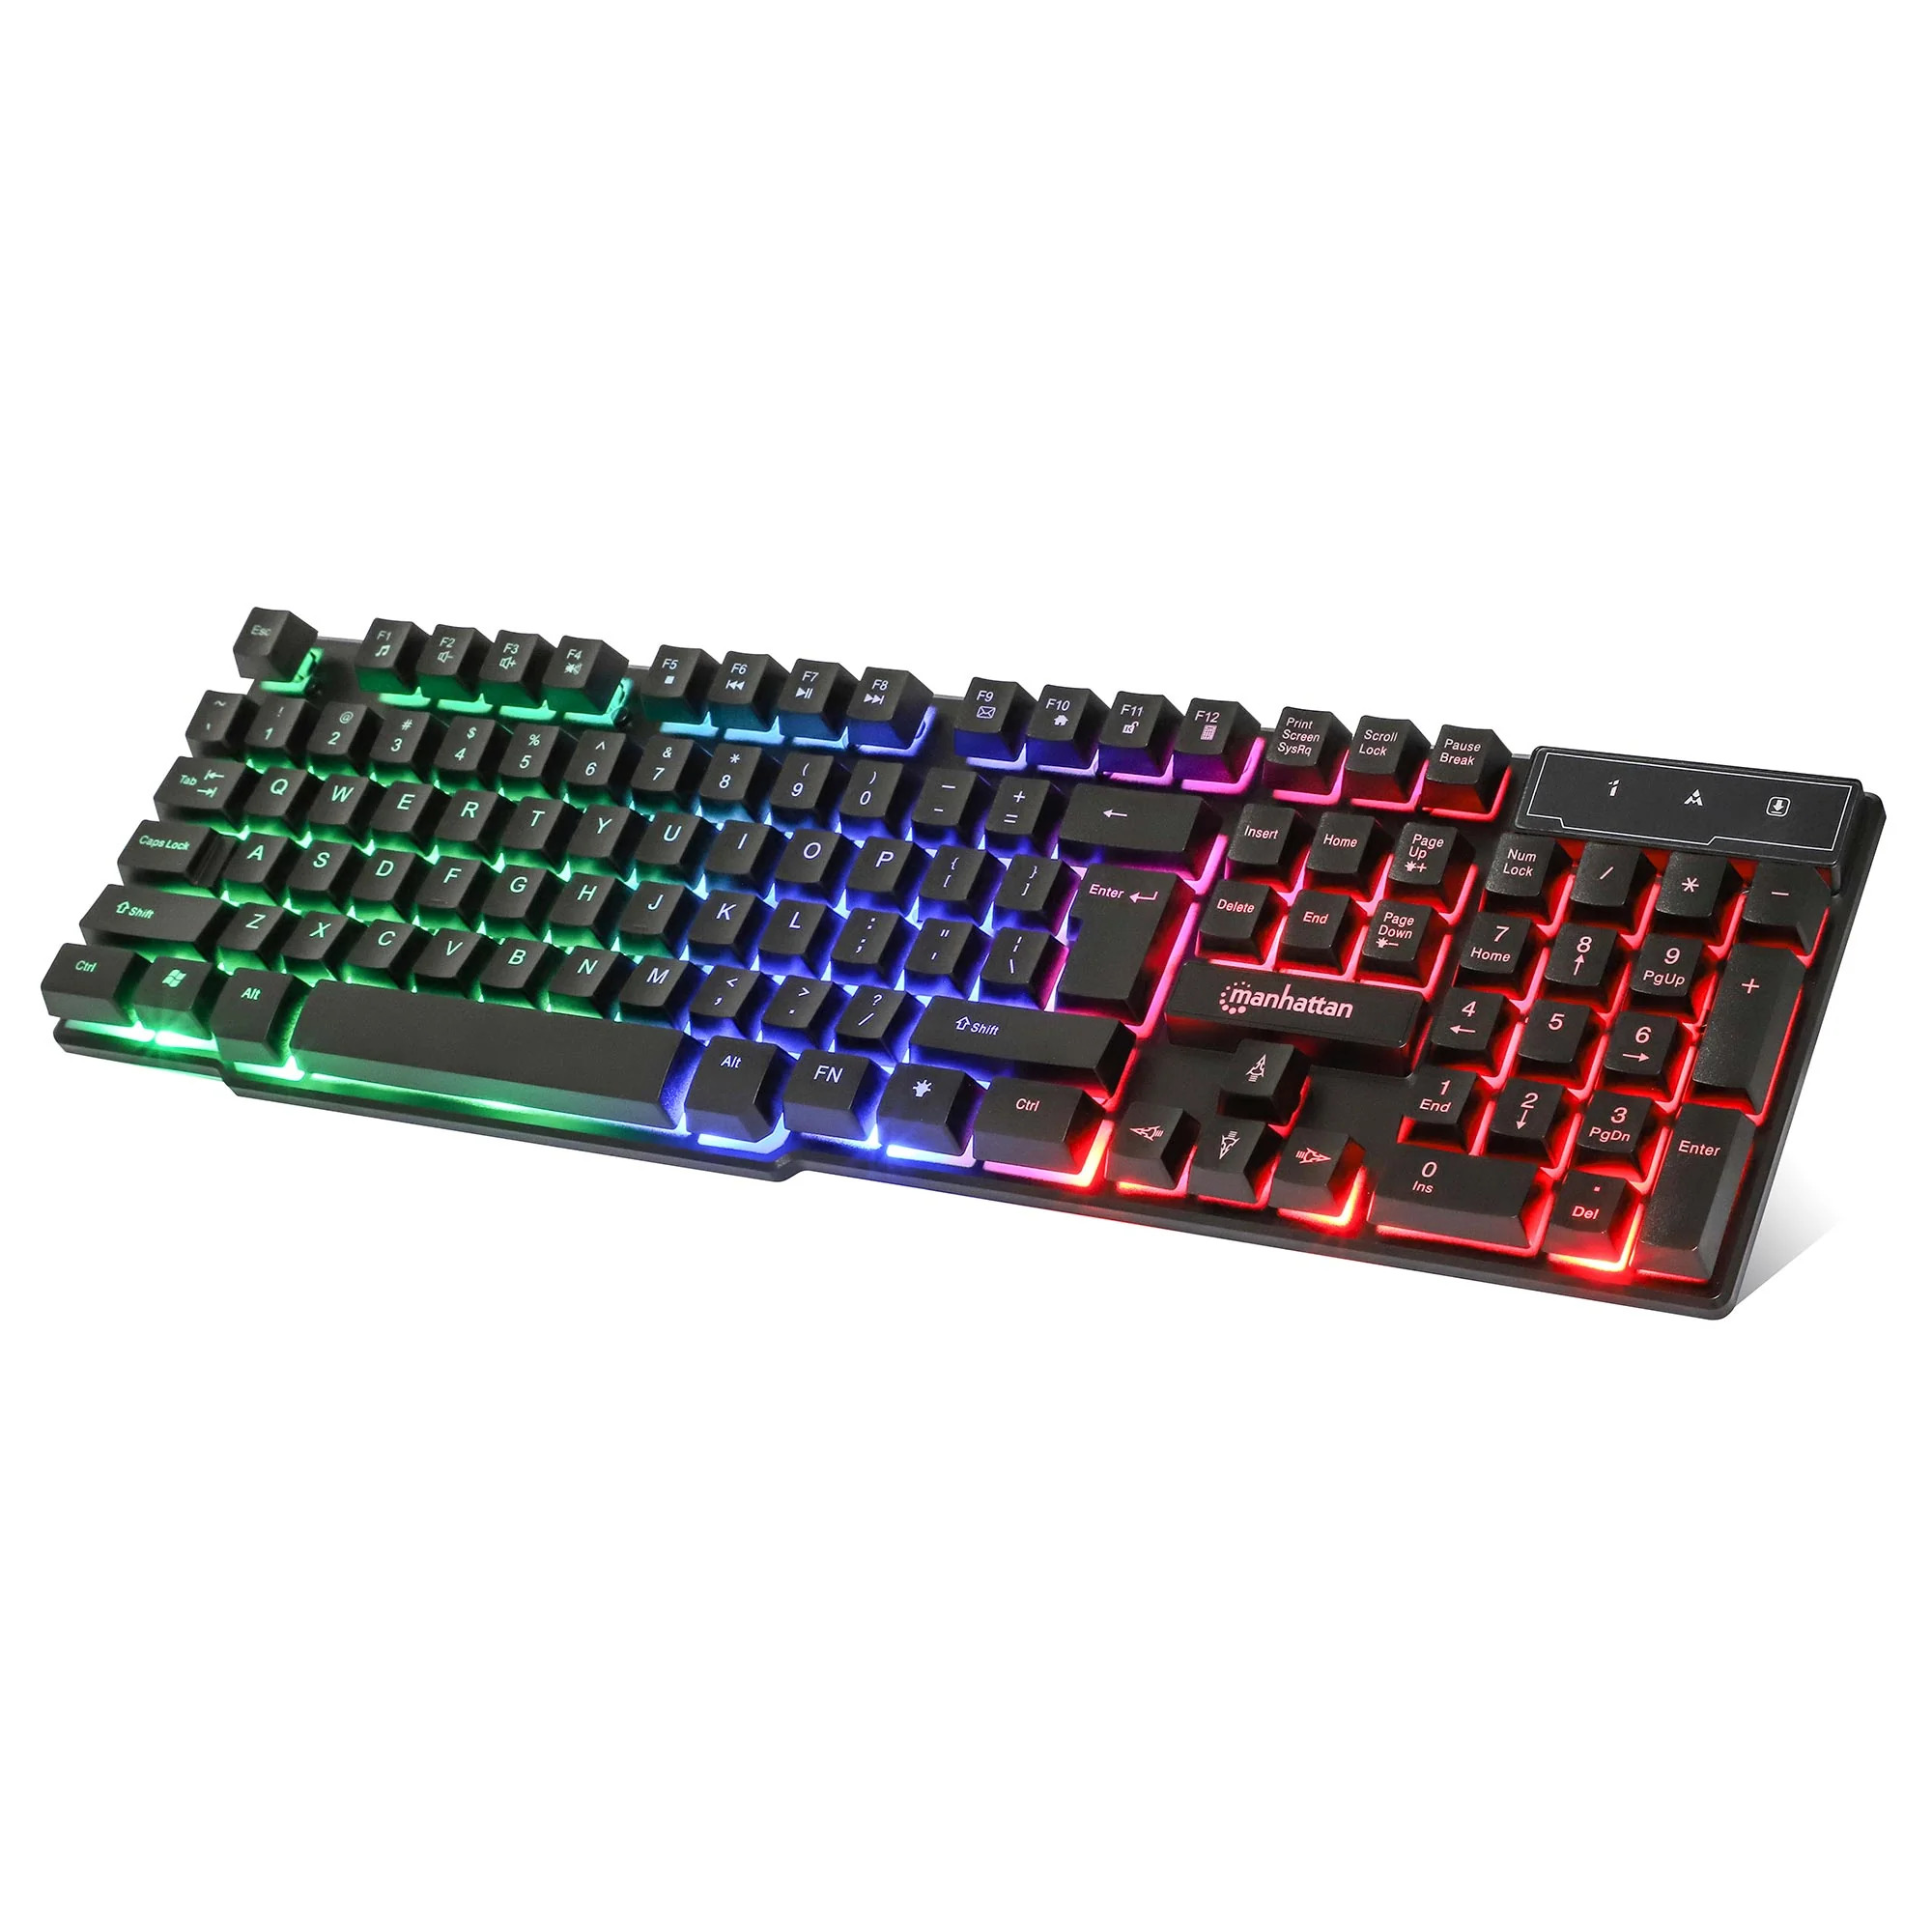 Manhattan Wired USB Gaming Keyboard – With Backlit RGB LED, Quiet Keystrokes - For Computer, PC, Desktop, Gamer - image 1 of 11